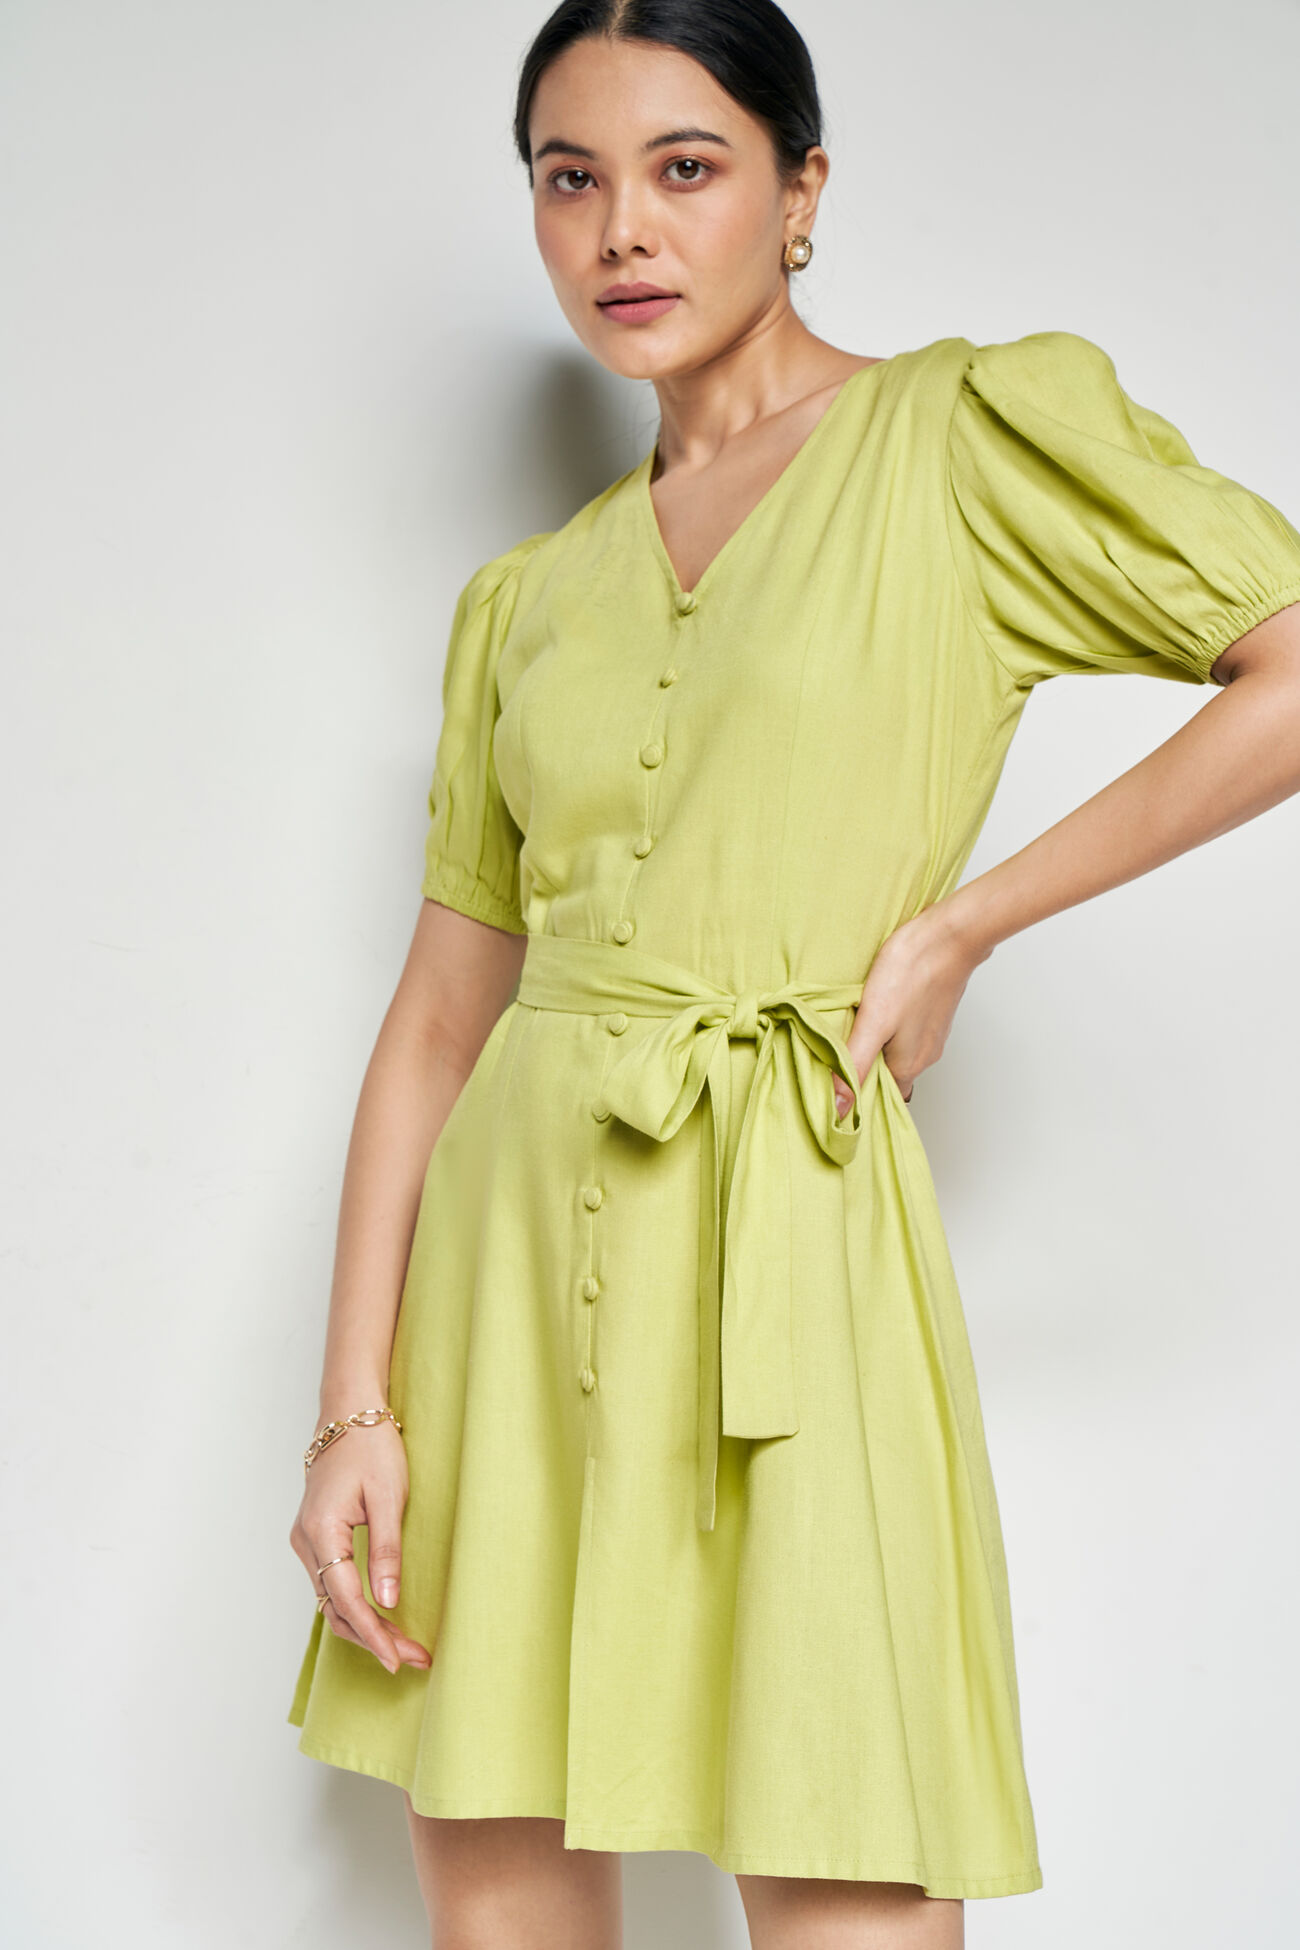 Star In Your Eyes Dress, Lime Green, image 9